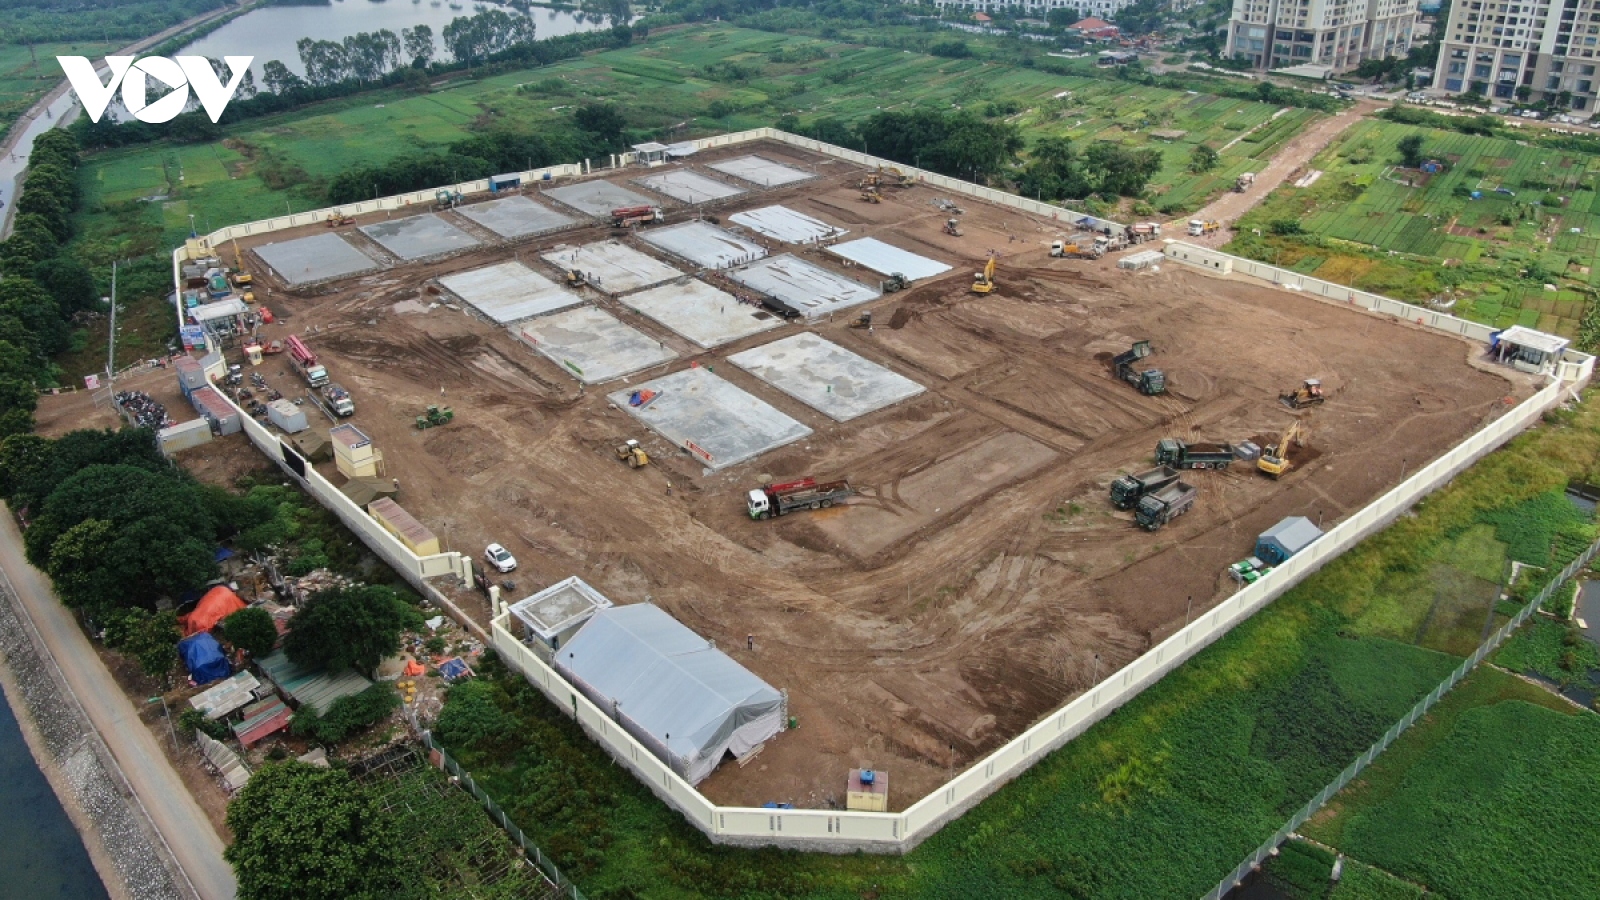 Large field hospital for severely-ill COVID-19 patients takes shape in Hanoi